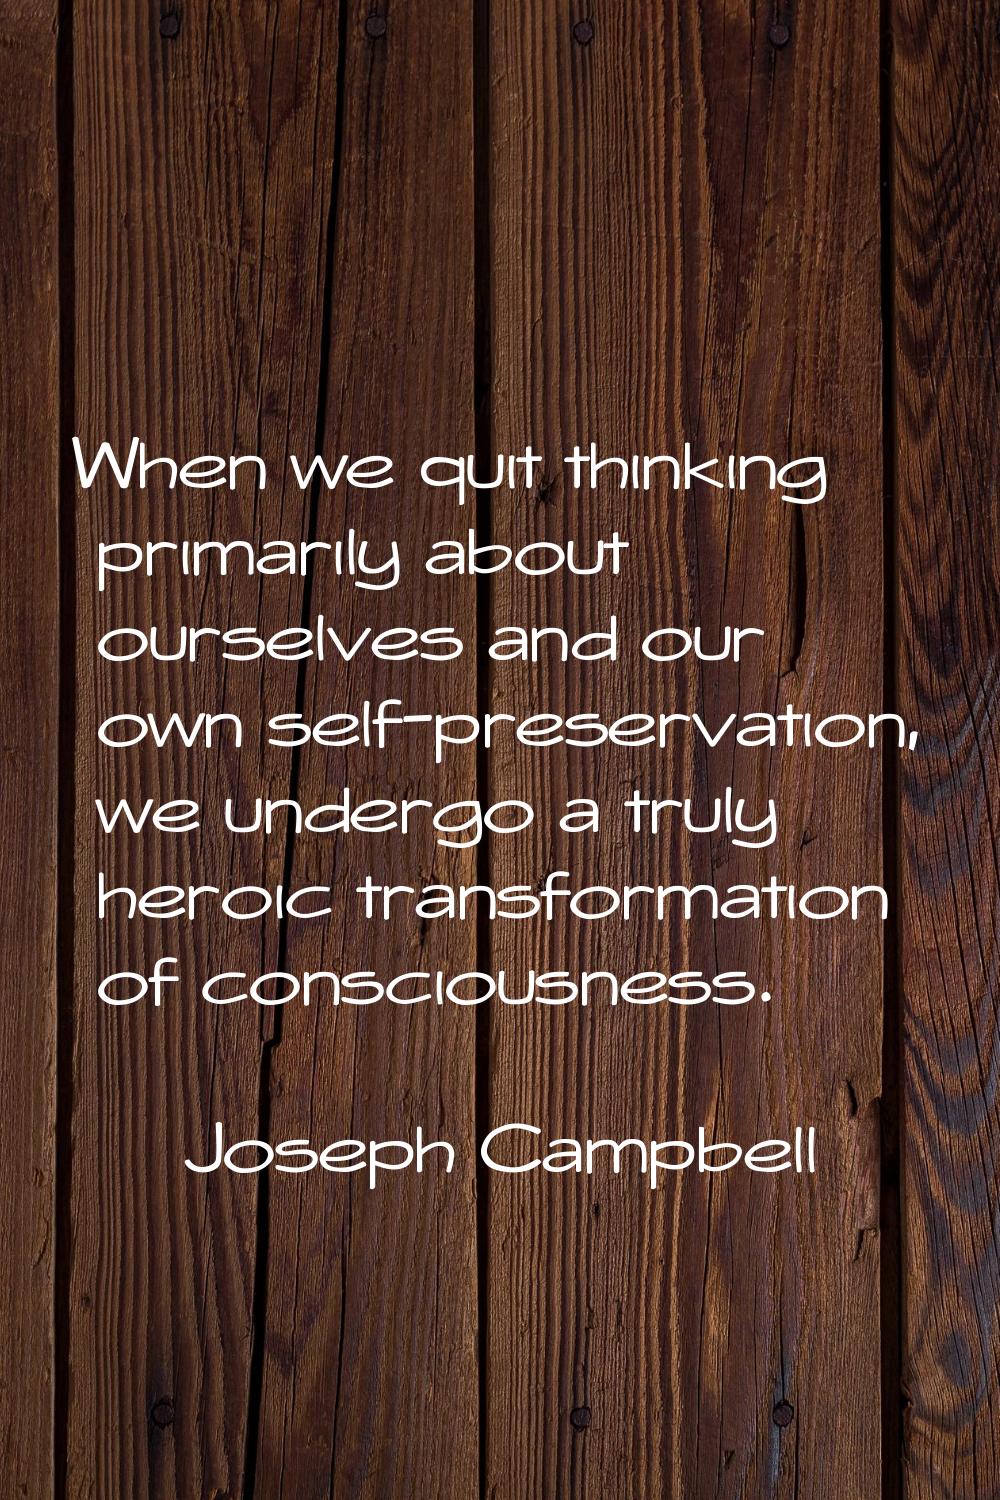 When we quit thinking primarily about ourselves and our own self-preservation, we undergo a truly h